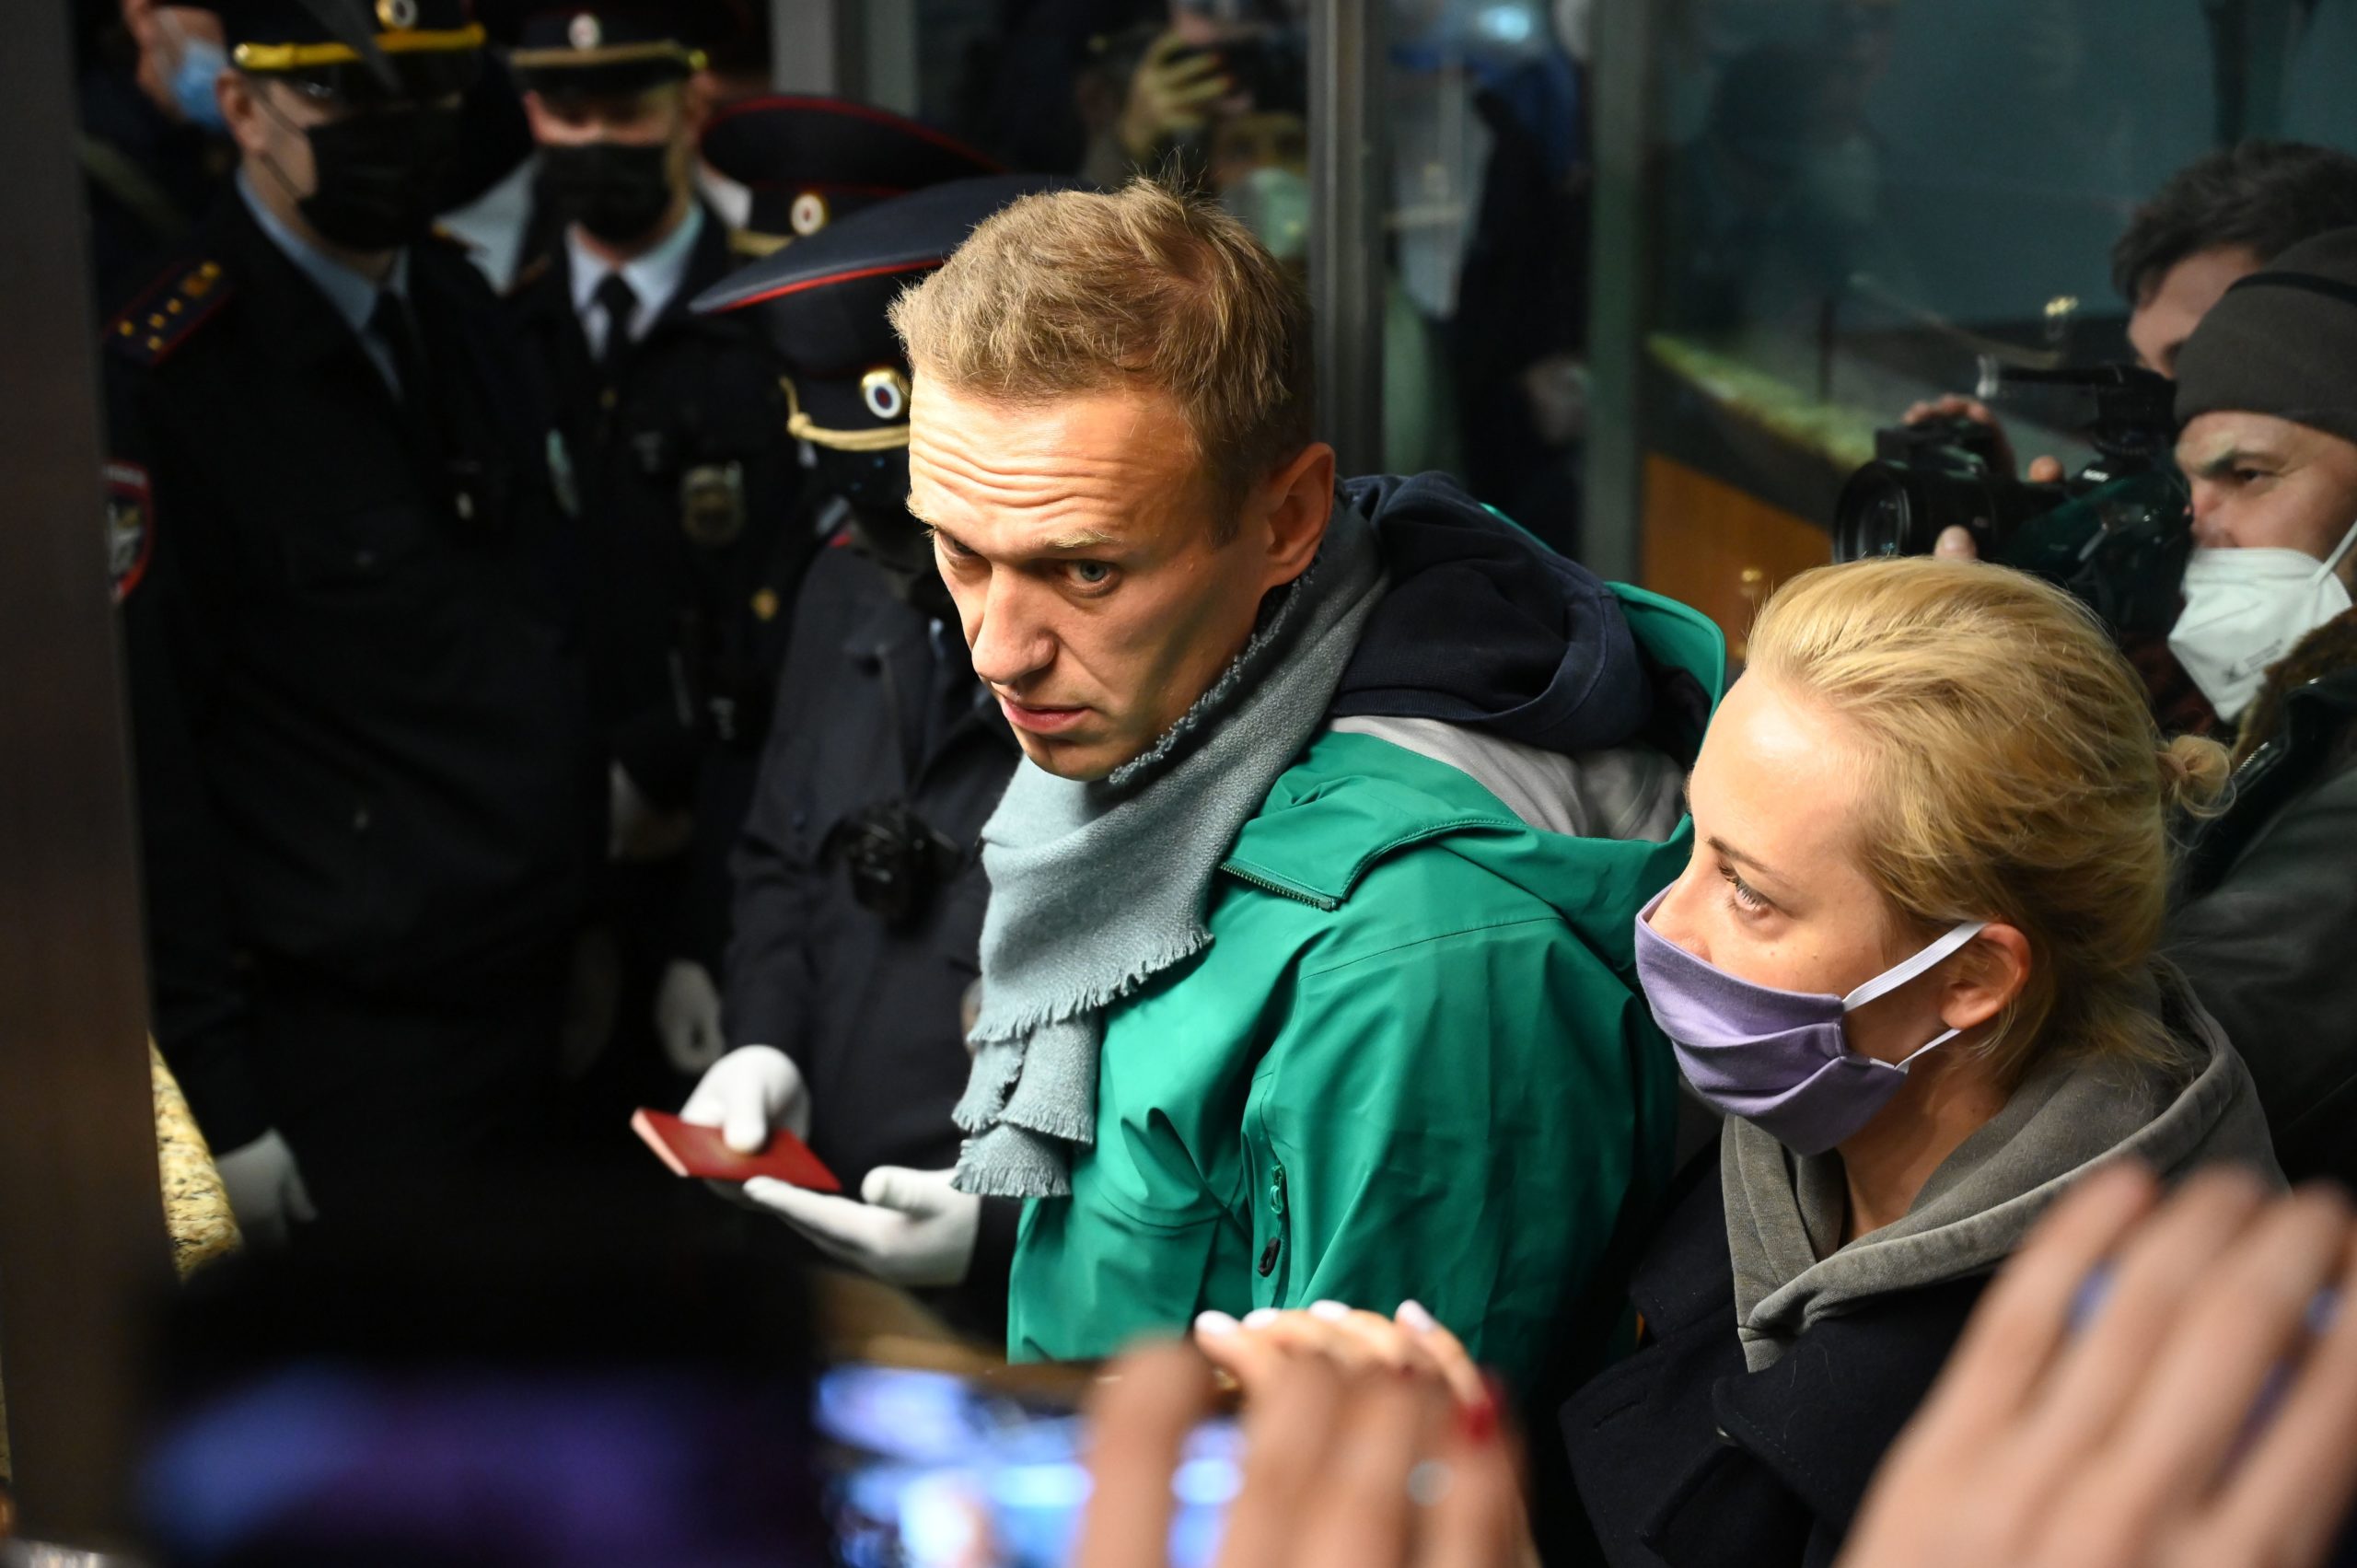 Russian opposition leader Alexei Navalny and his wife Yulia are seen at the passport control point at Moscow's Sheremetyevo airport on January 17, 2021. (KIRILL KUDRYAVTSEV/AFP via Getty Images)